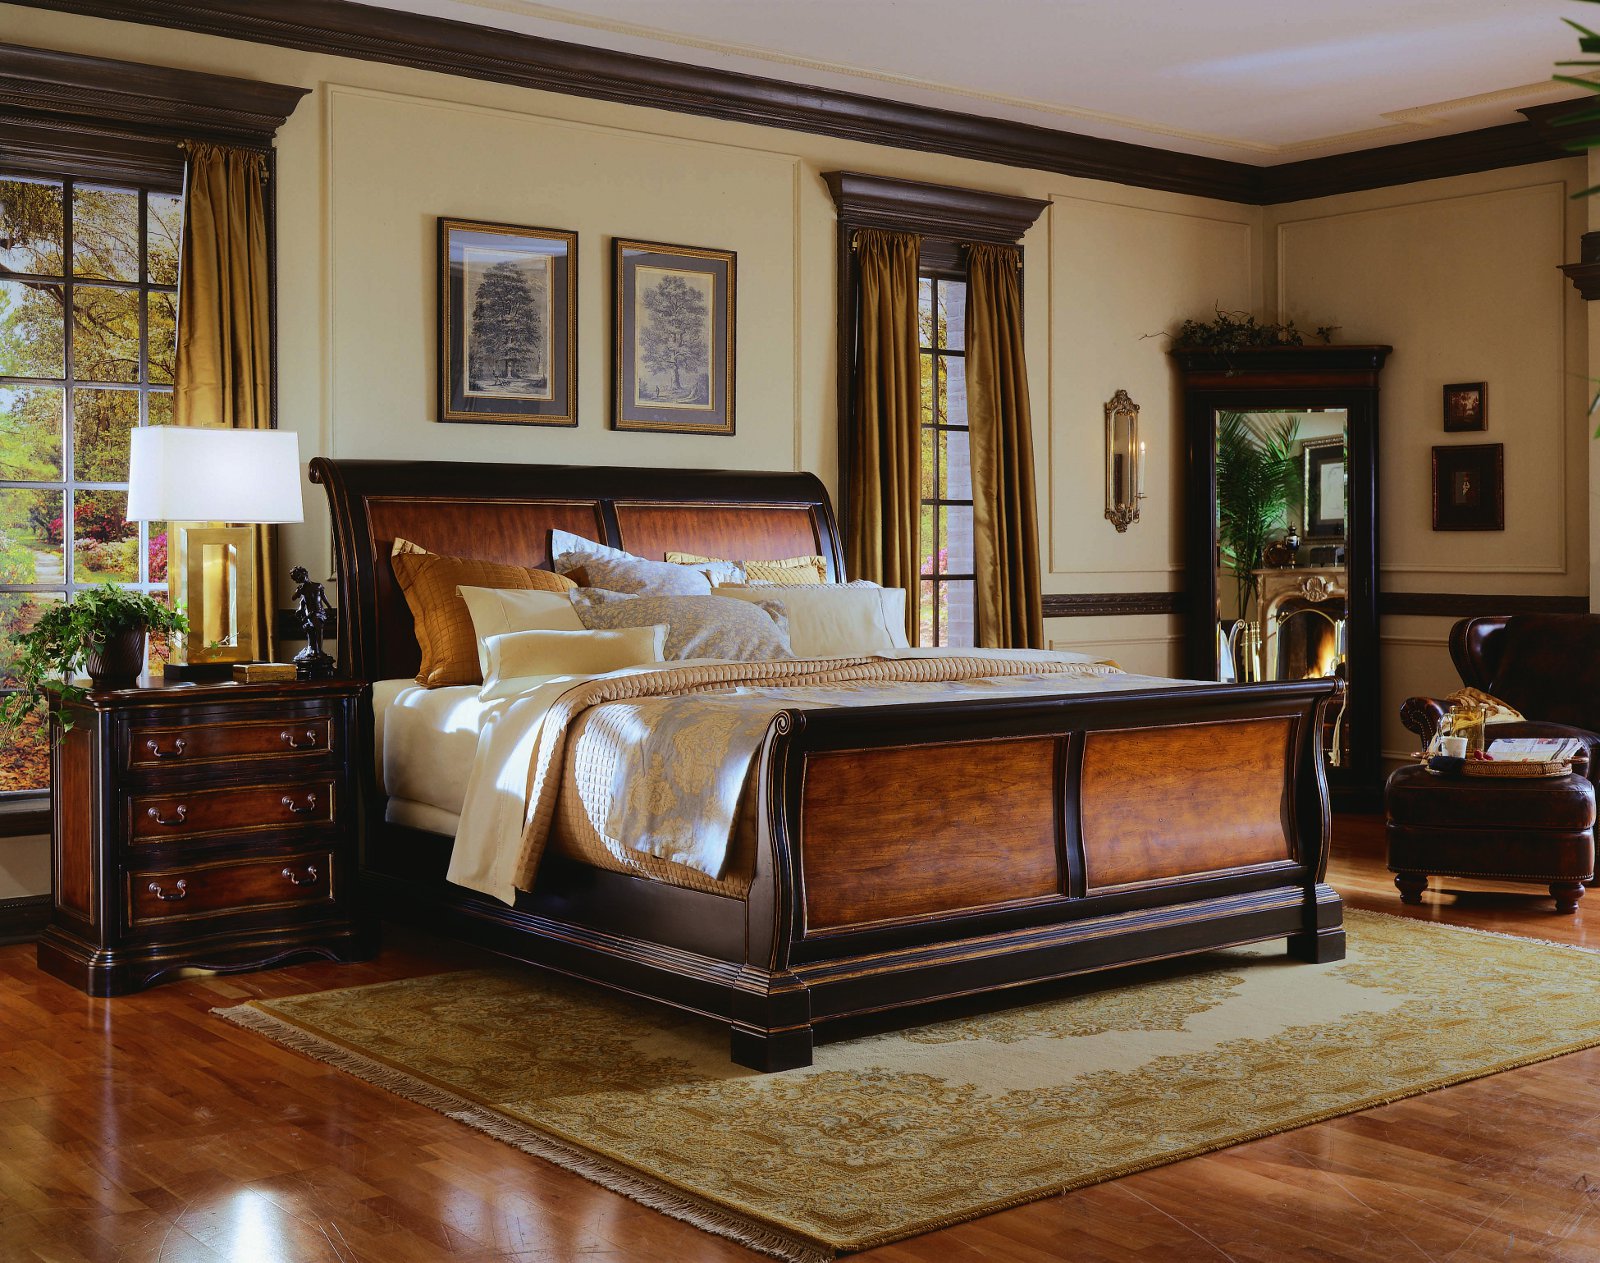 Care of Your Mahogany Bedroom Furniture